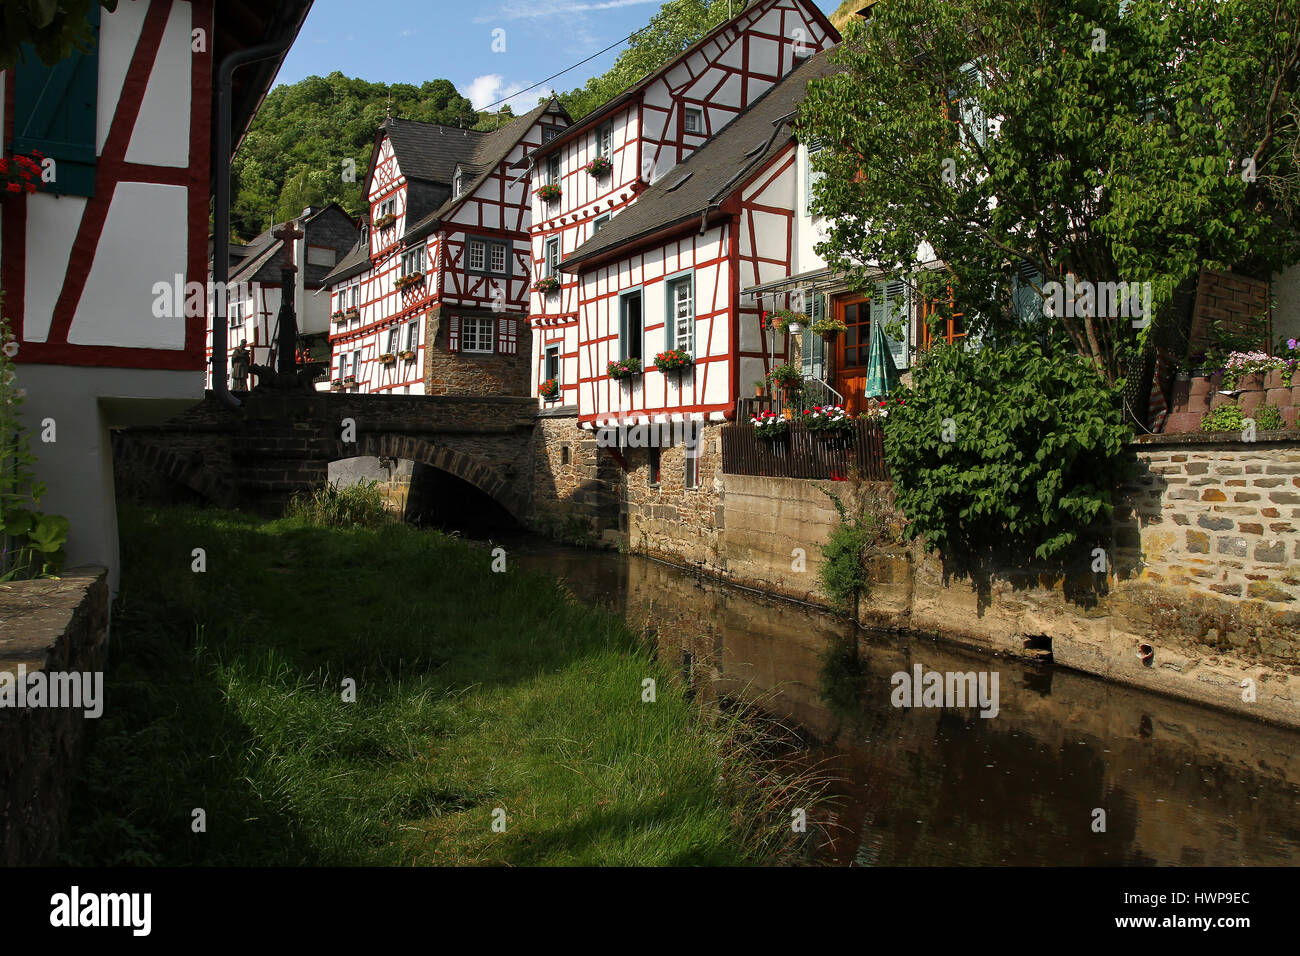 Creek lined with historic houses and wrought iron railing in the medieval village Monreal Germany Stock Photo